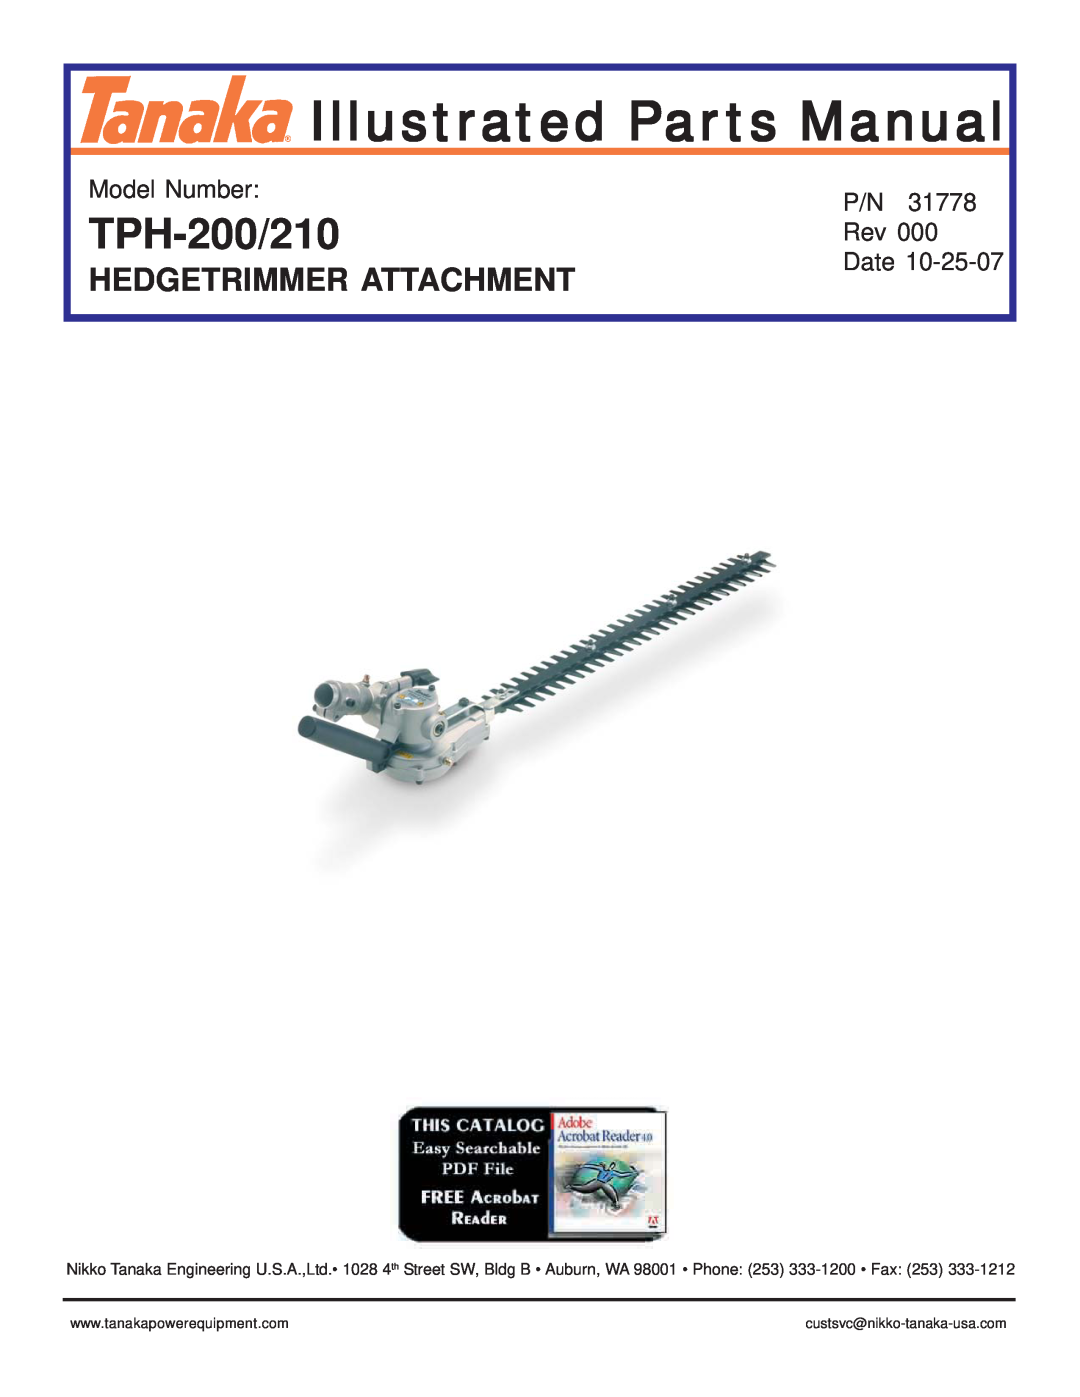 Tanaka TPH-210 manual Hedgetrimmer Attachment, Model Number, Illustrated Parts Manual, TPH-200/210, Date 